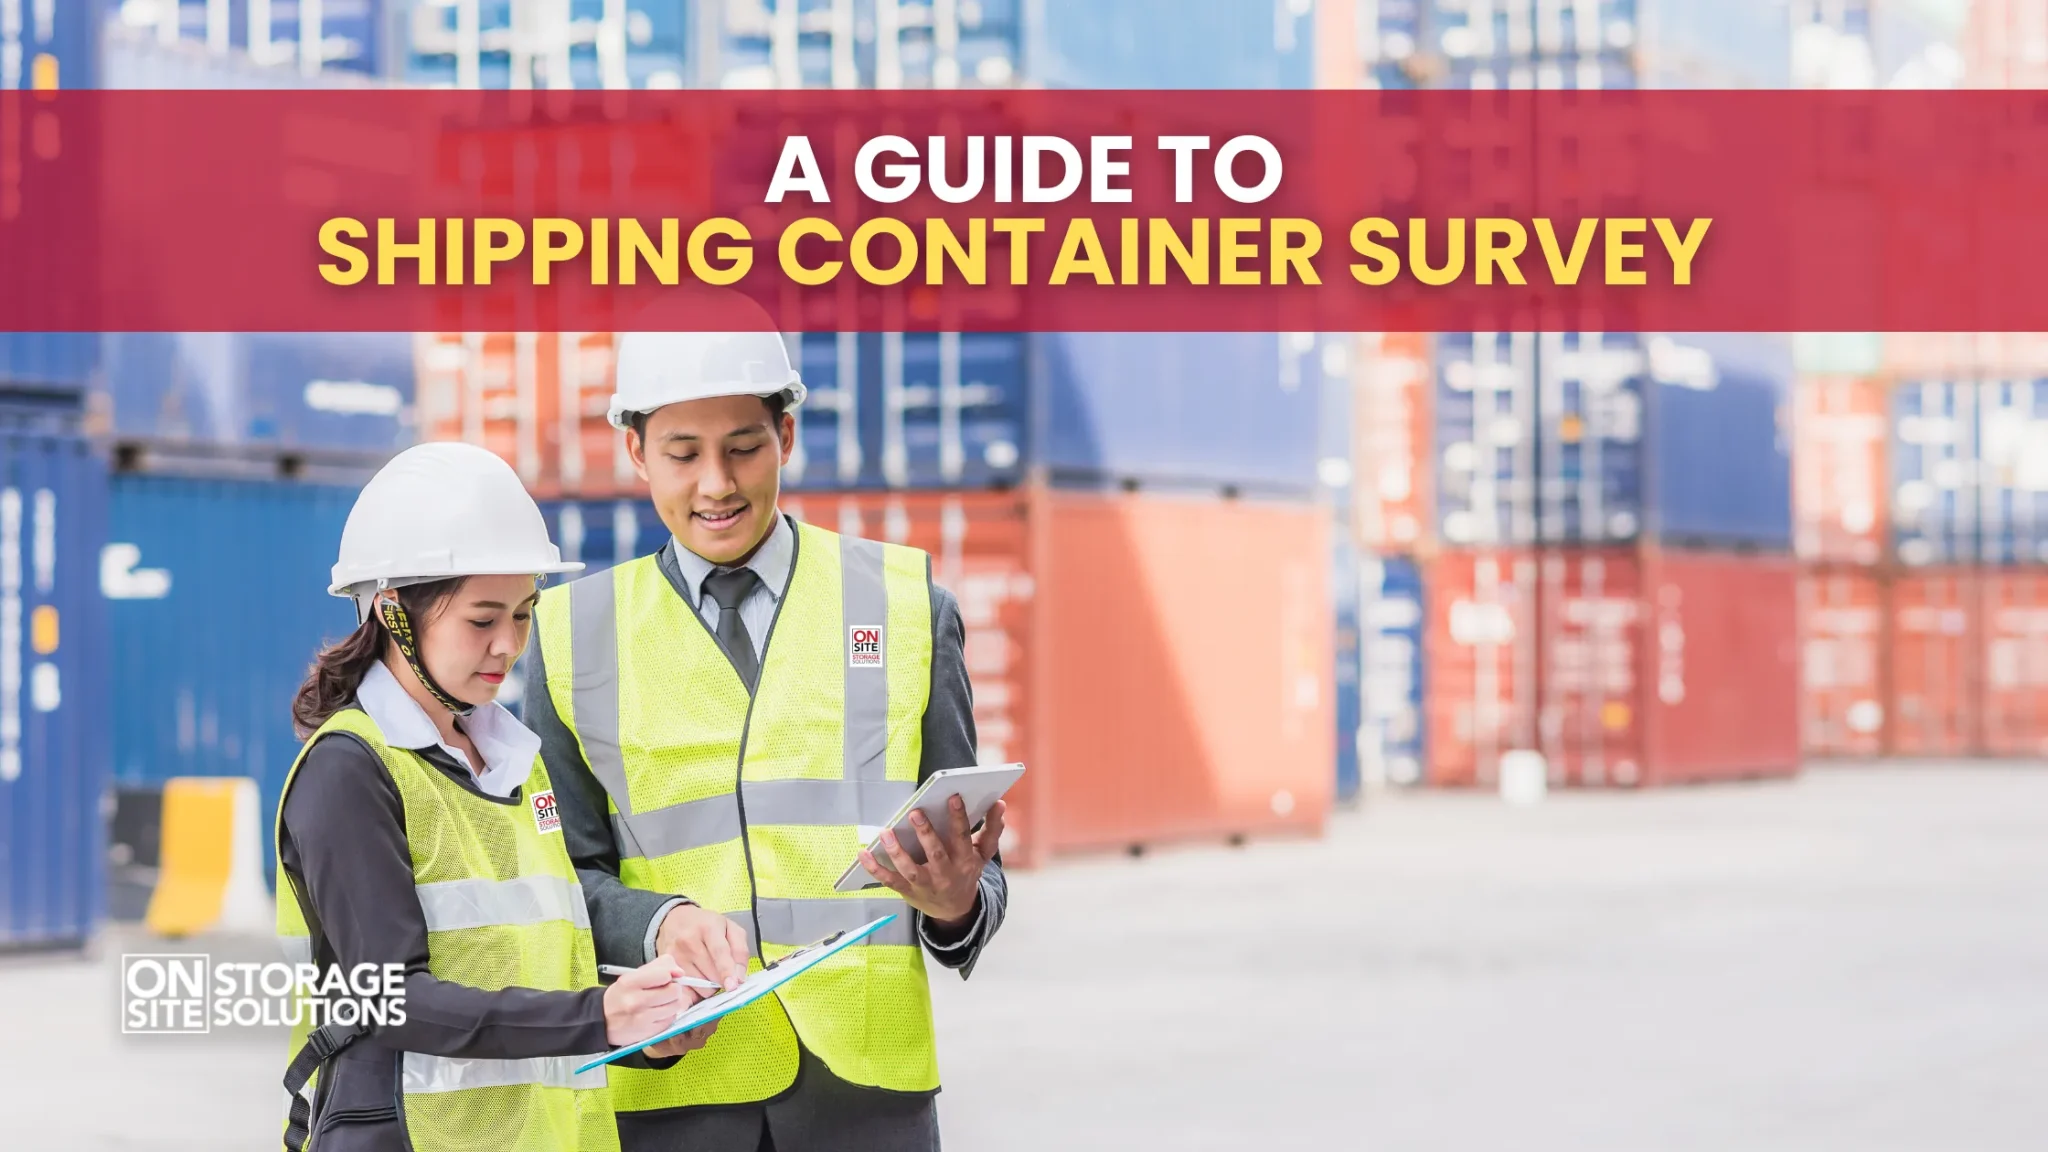 A Guide to Shipping Container Survey